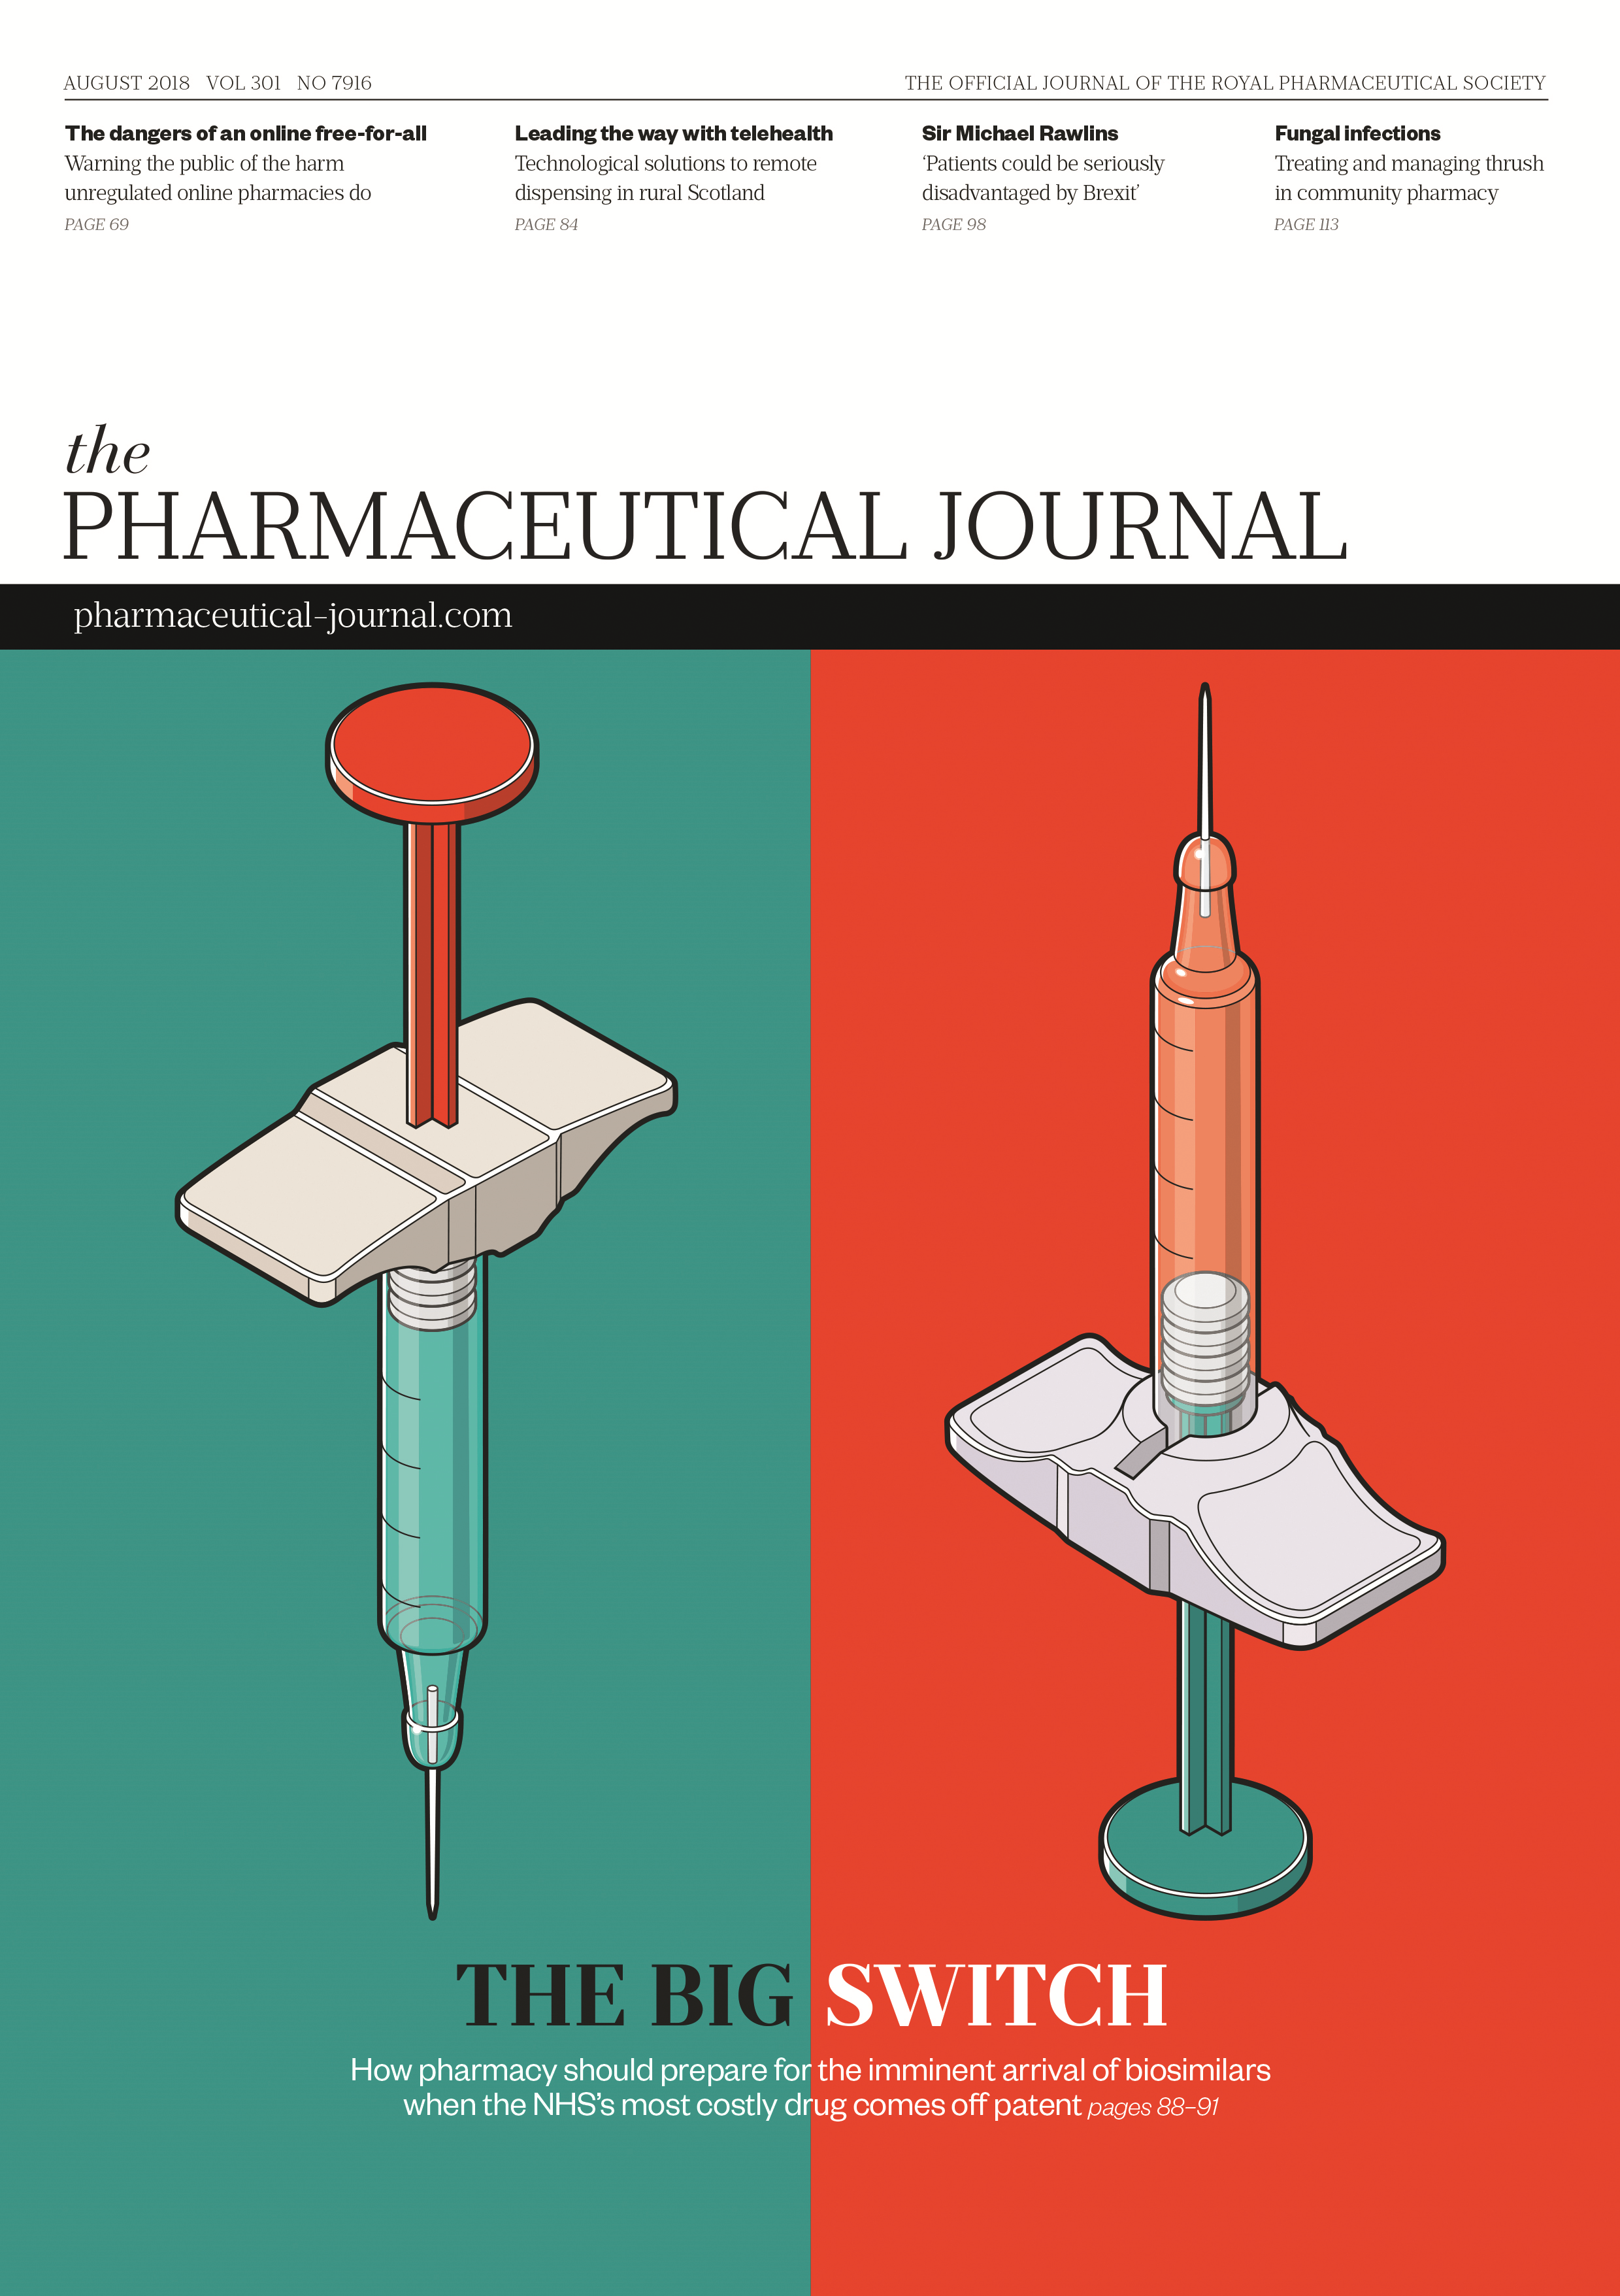 Publication issue cover for PJ, August 2018, Vol 301, No 7916